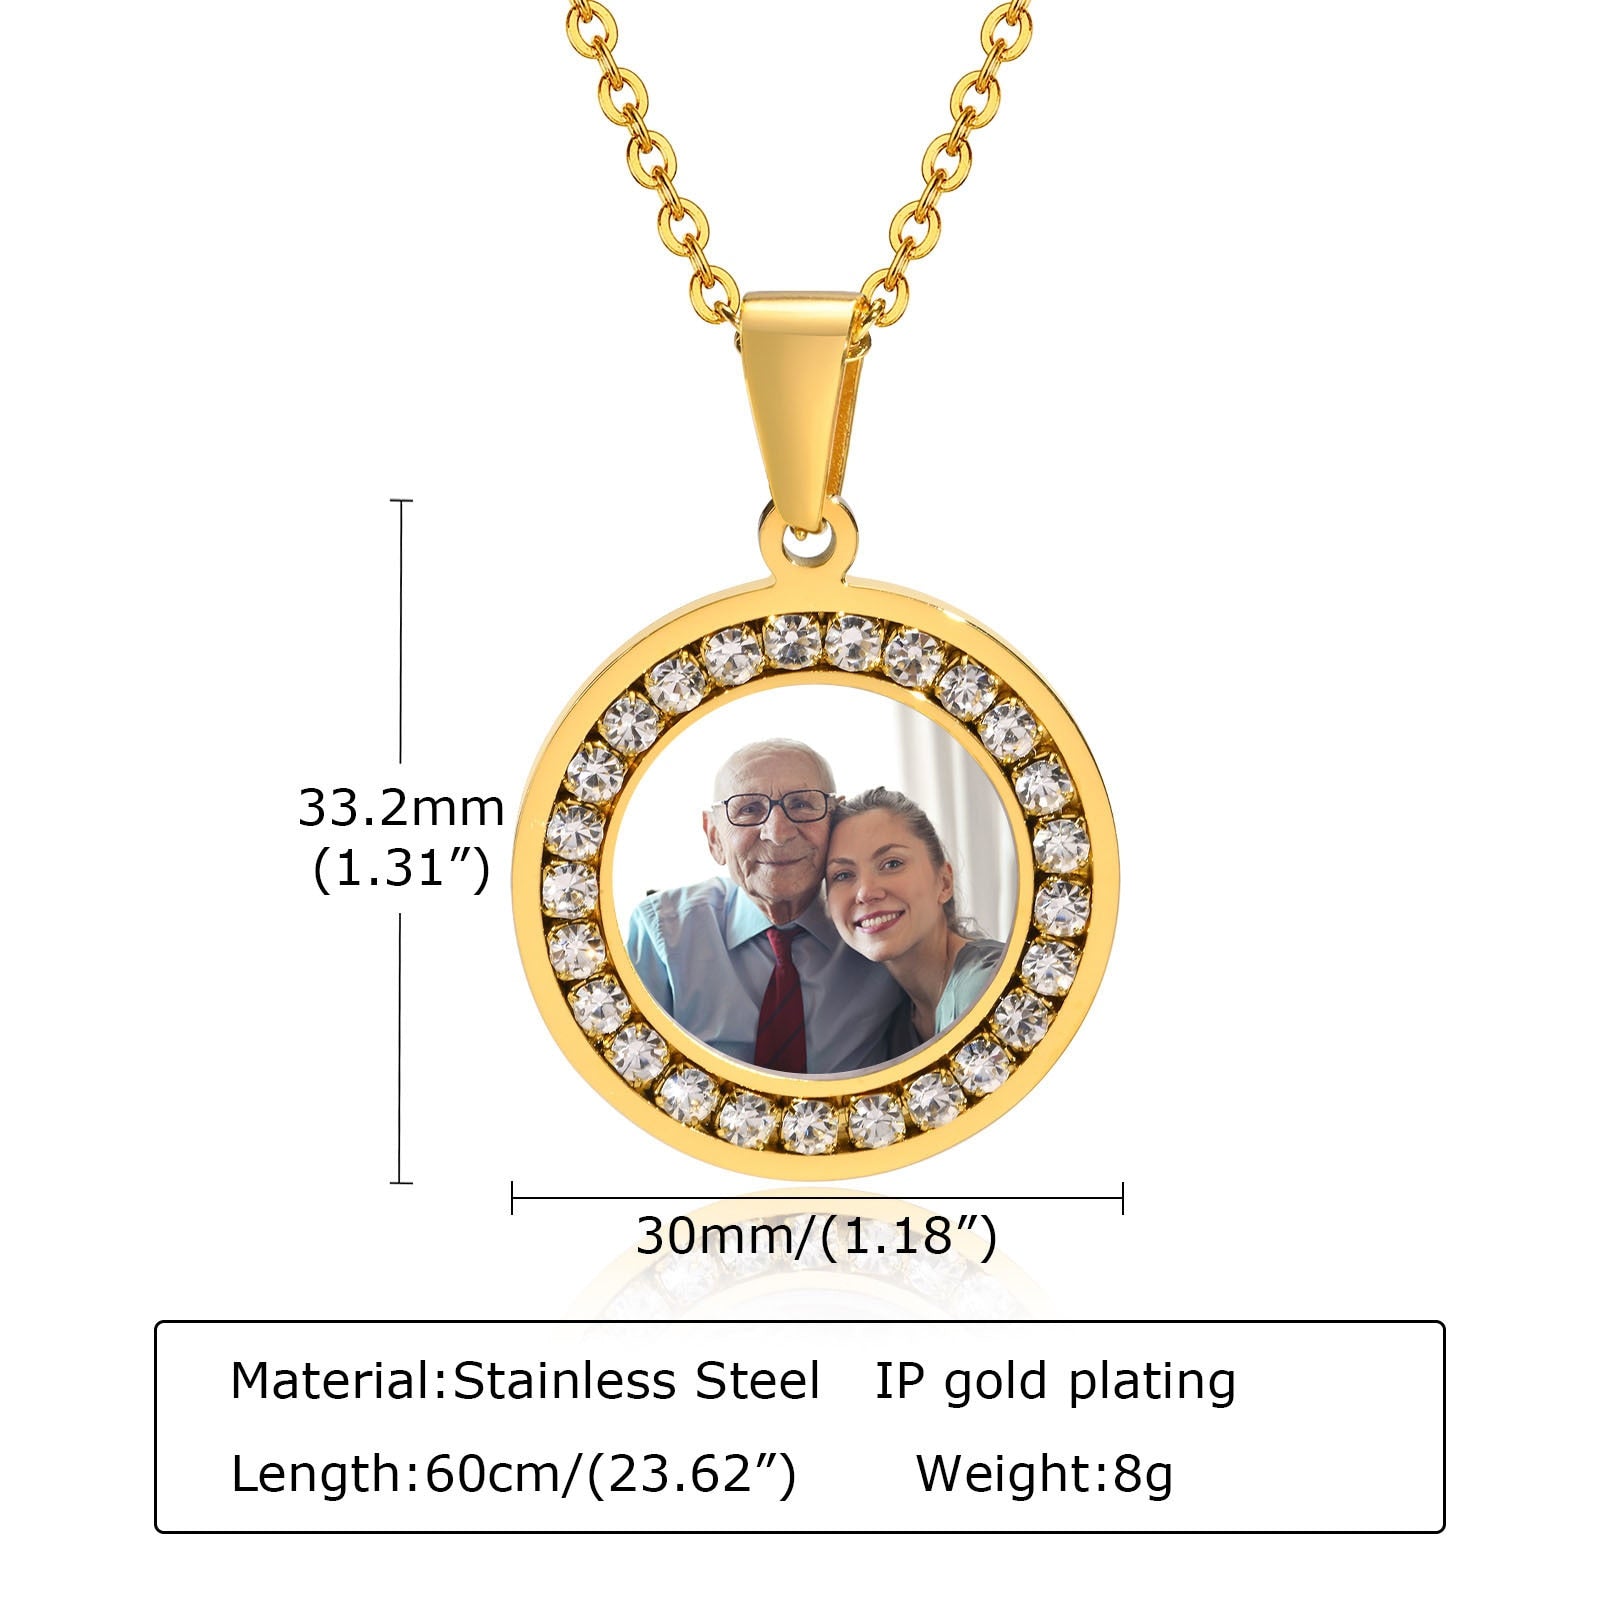 Custom Picture Photo Necklace Pendant For Women Men,Personalized Round Cubic Zirconia Necklace Stainless Steel Chain Adjustable - Charlie Dolly